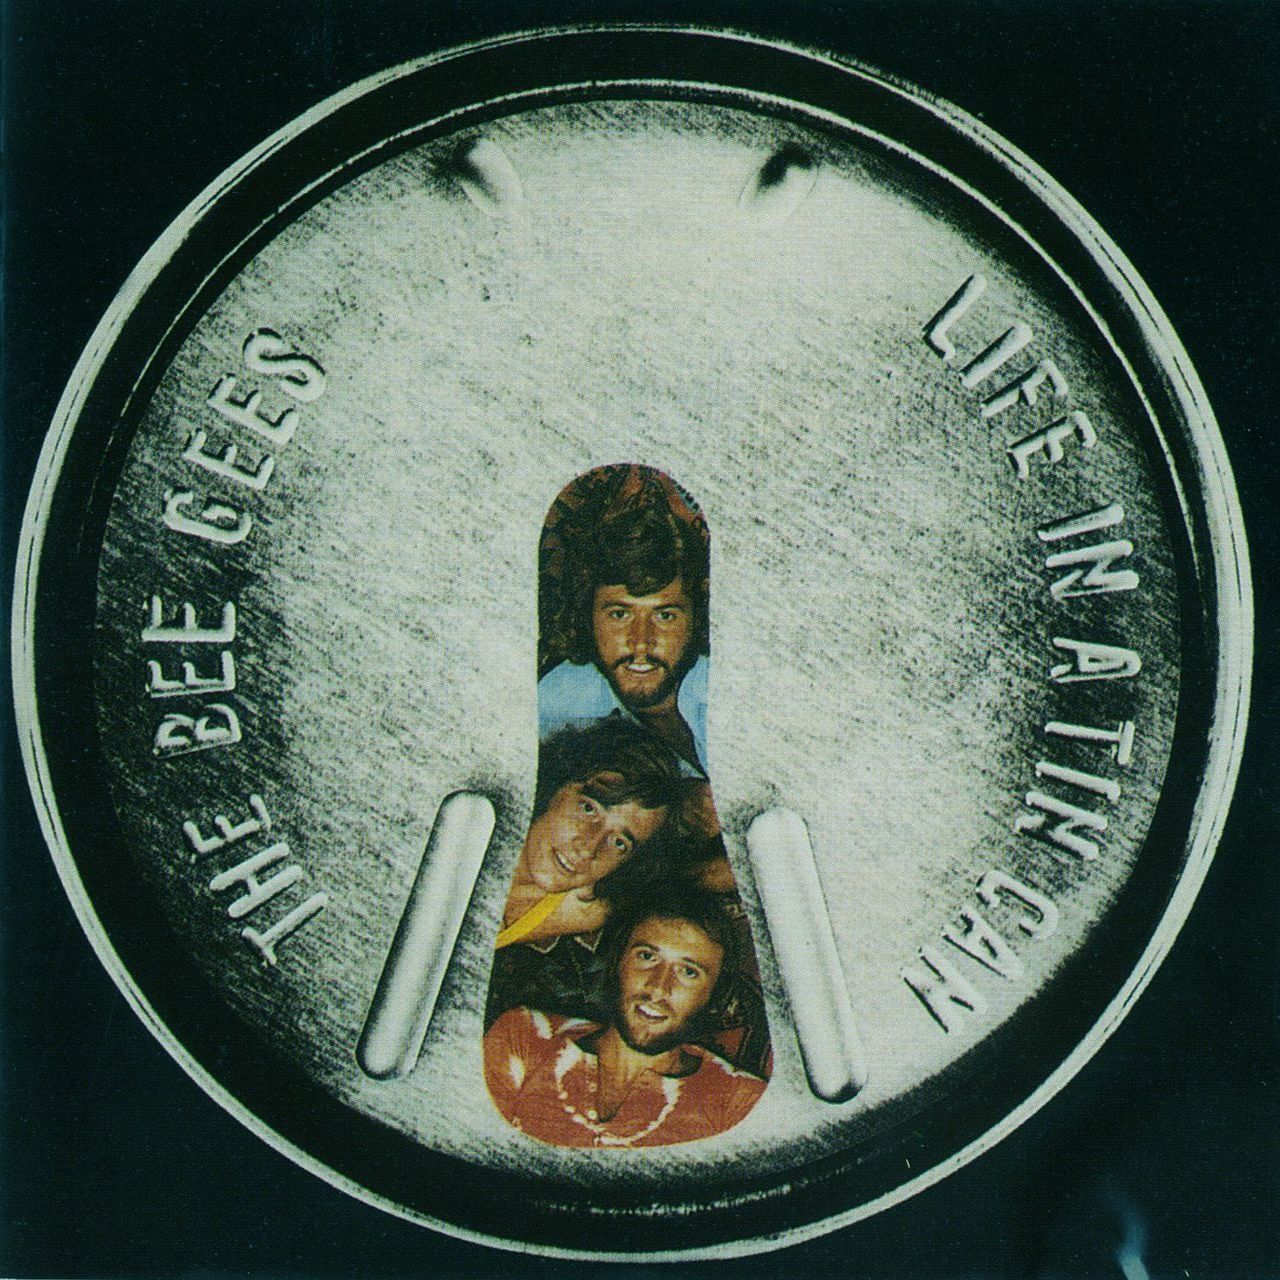 Album artwork for 'Life In A Tin Can' by The Bee Gees